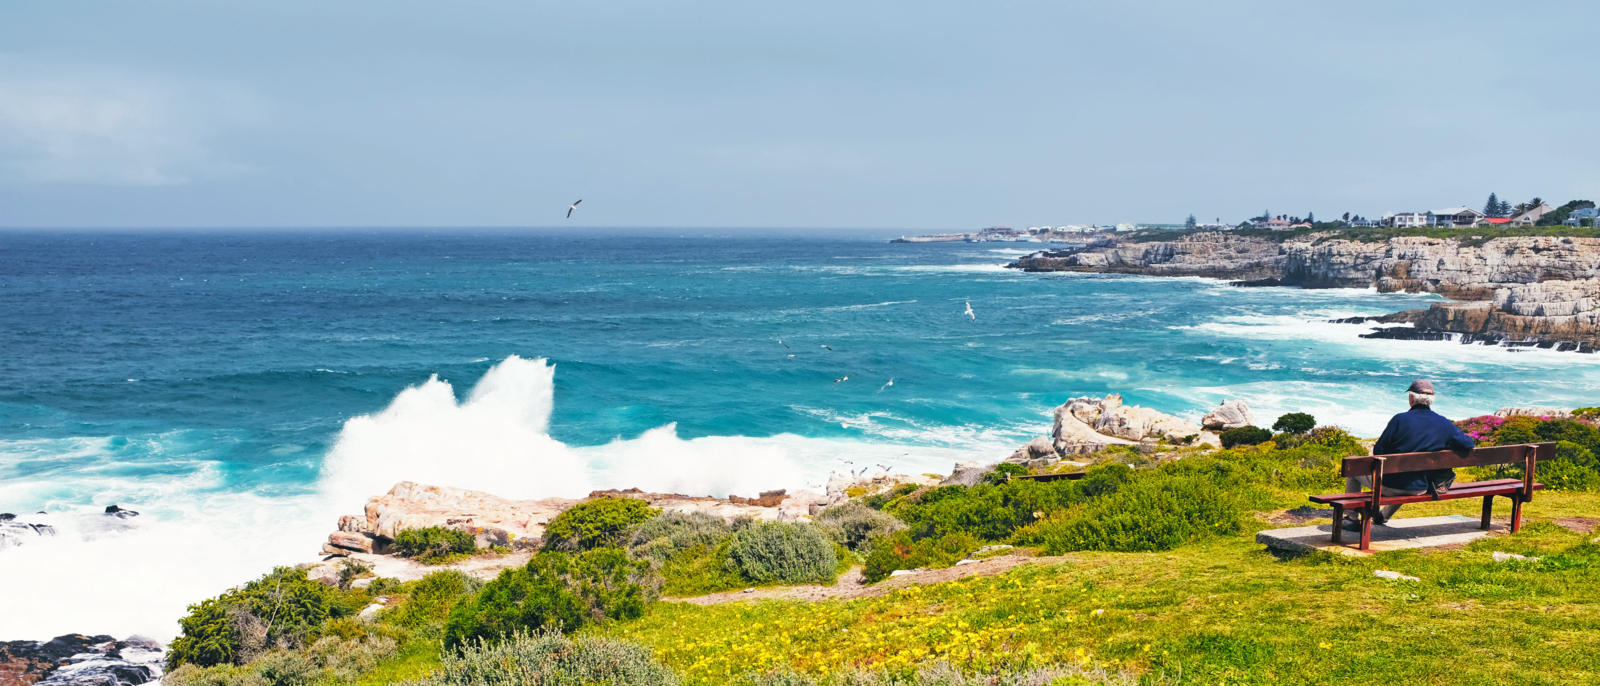 Hermanus is the best land based place to spot the migrating southern right wales during winter and springtime. The Atlantic Ocean is very rough at this location.